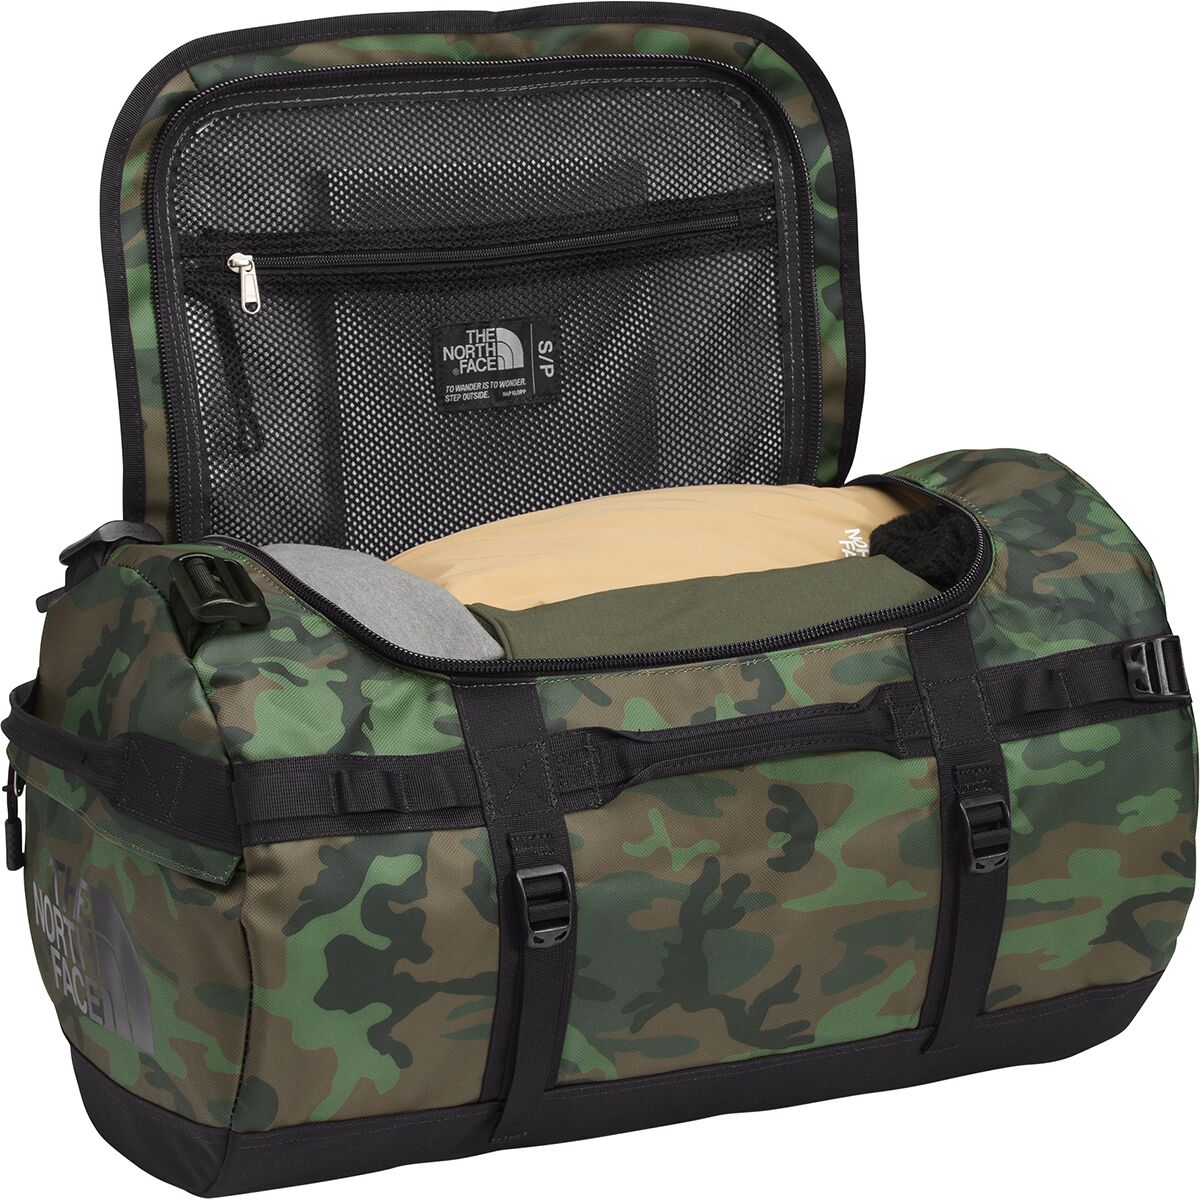 The North Face Base Camp S 50L Duffel Bag - Accessories